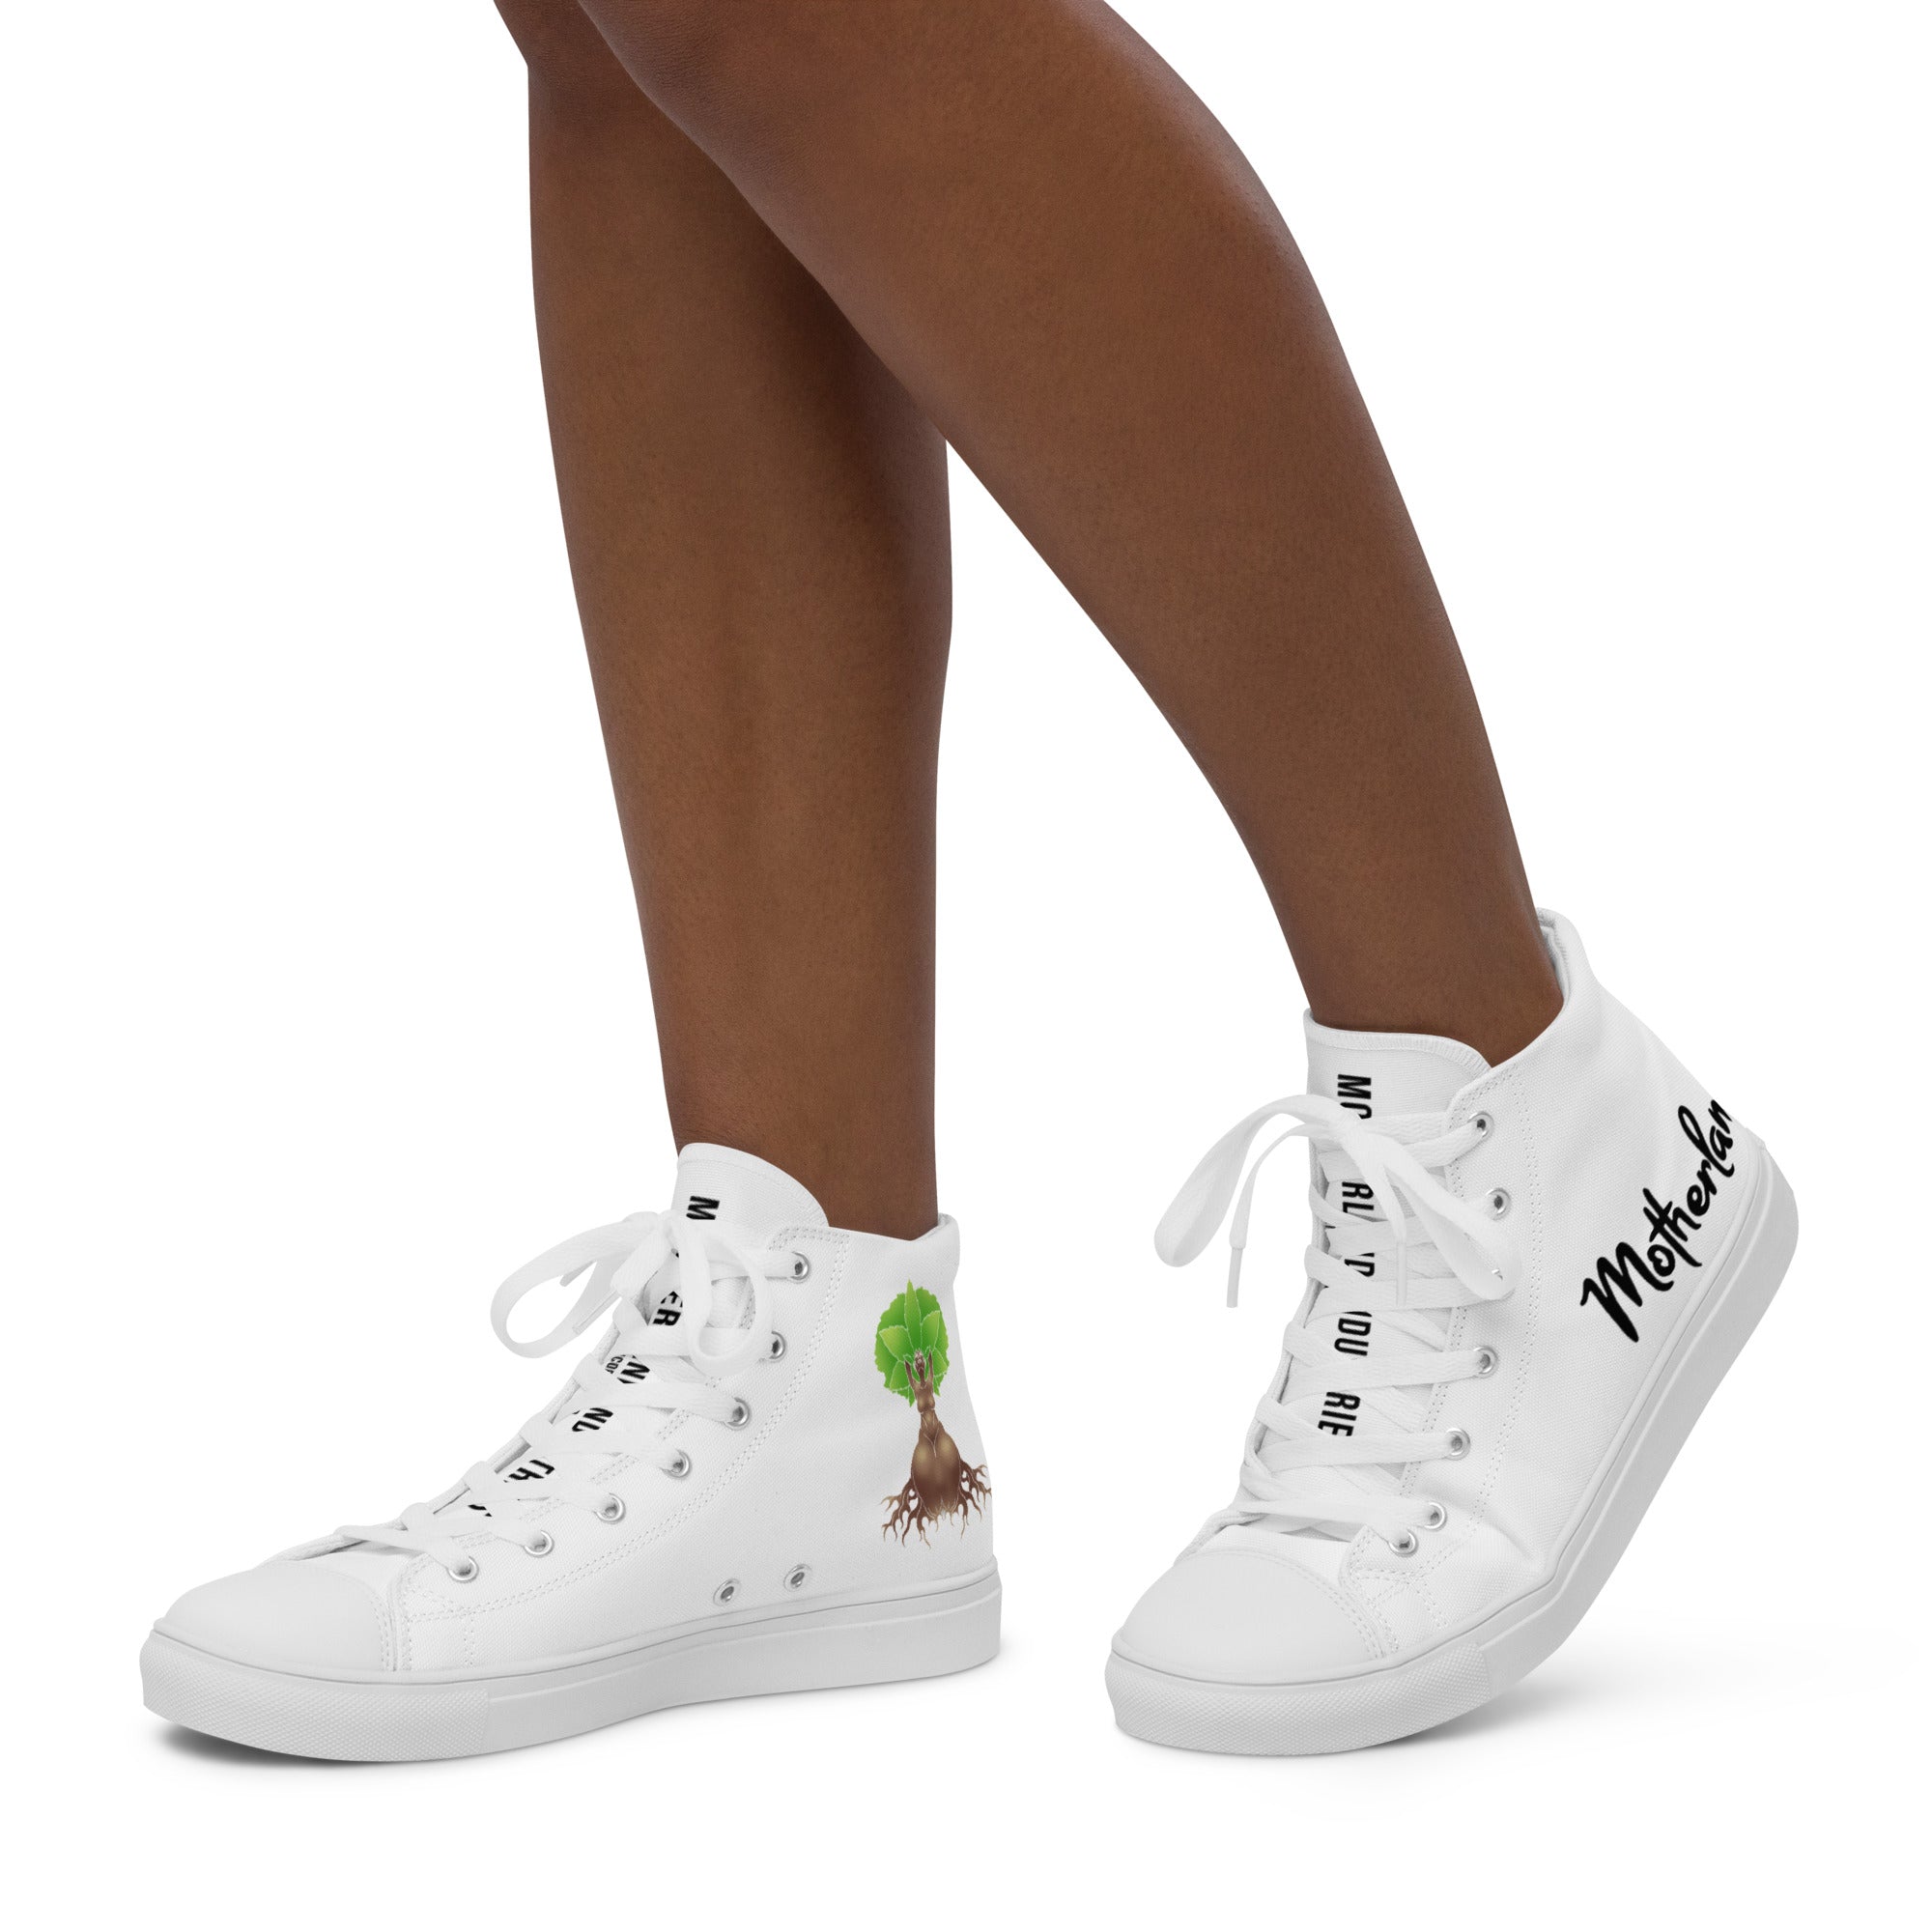 Women's high top canvas shoes — Flow Tribe